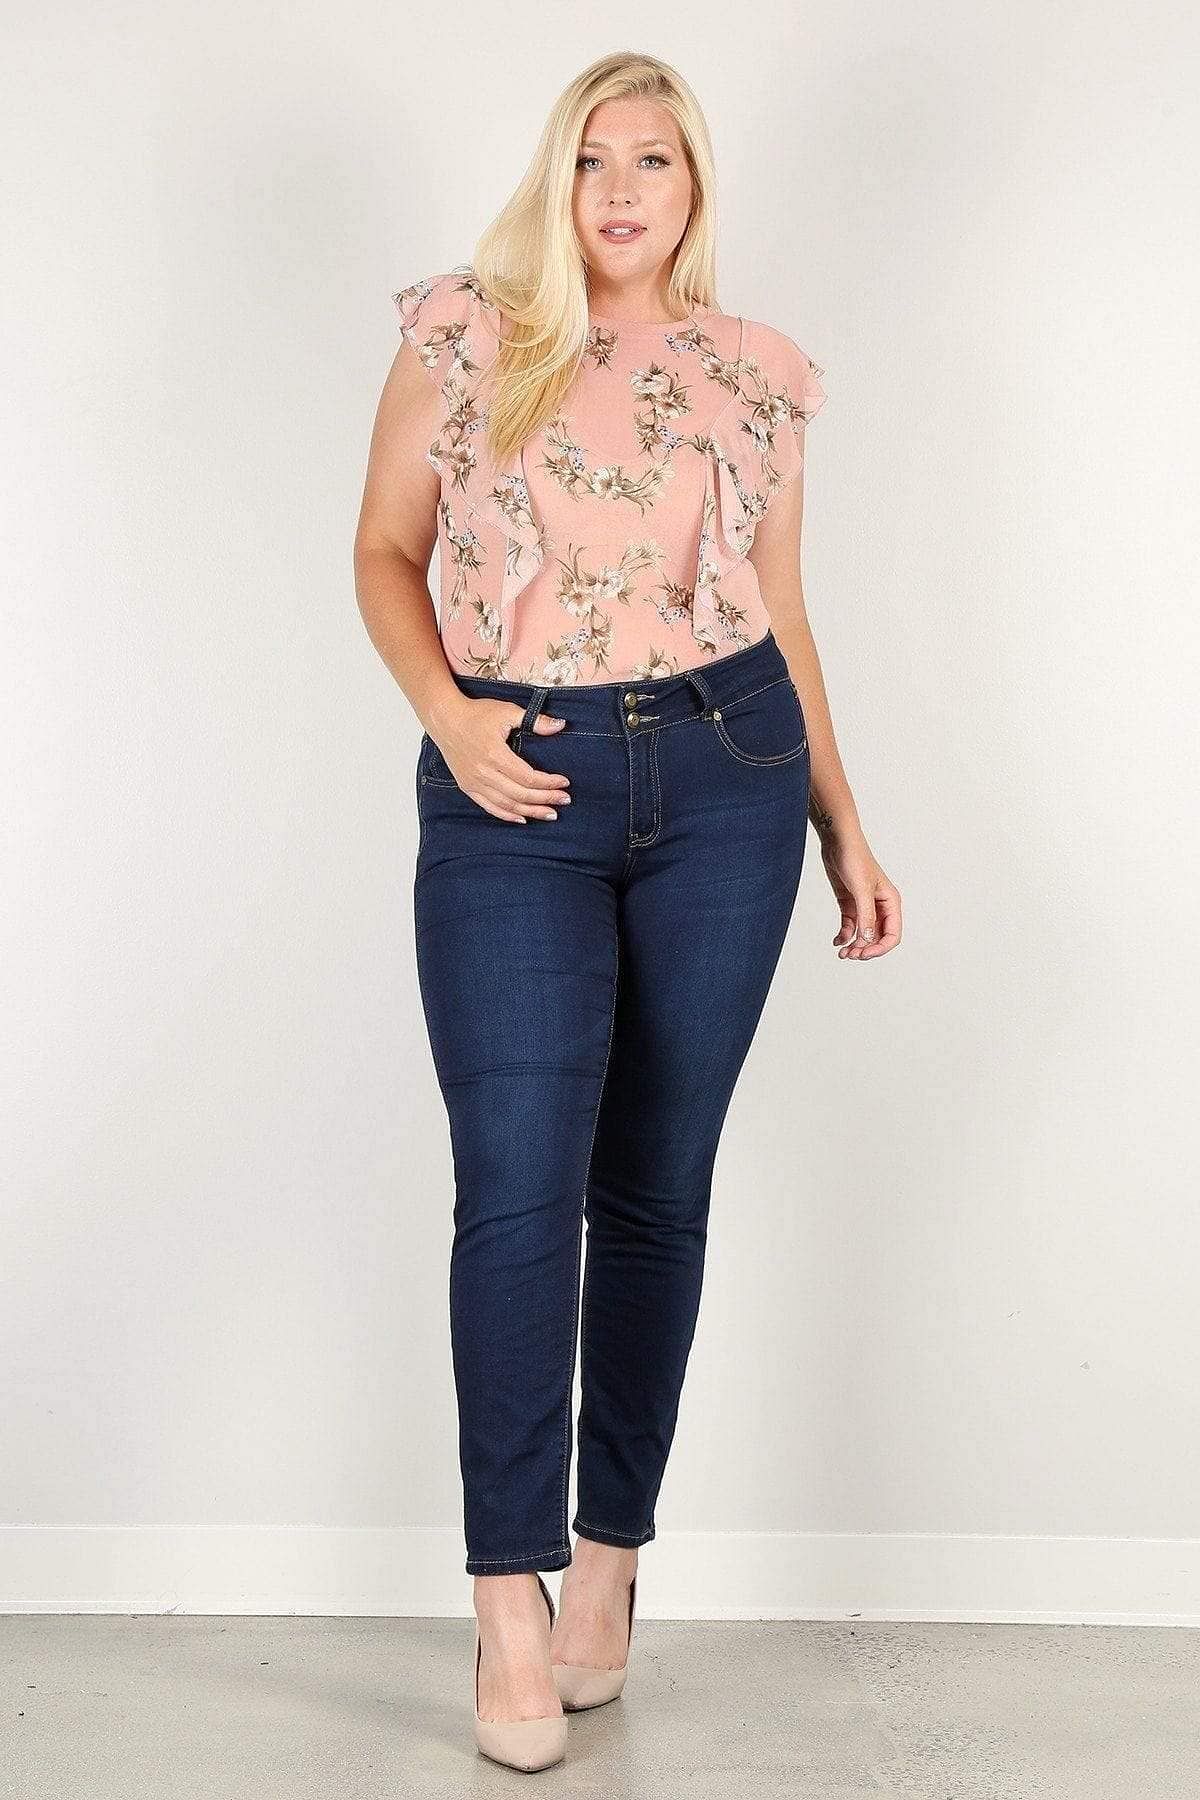 Pink Short Sleeve Floral Top - Shopping Therapy, LLC Top